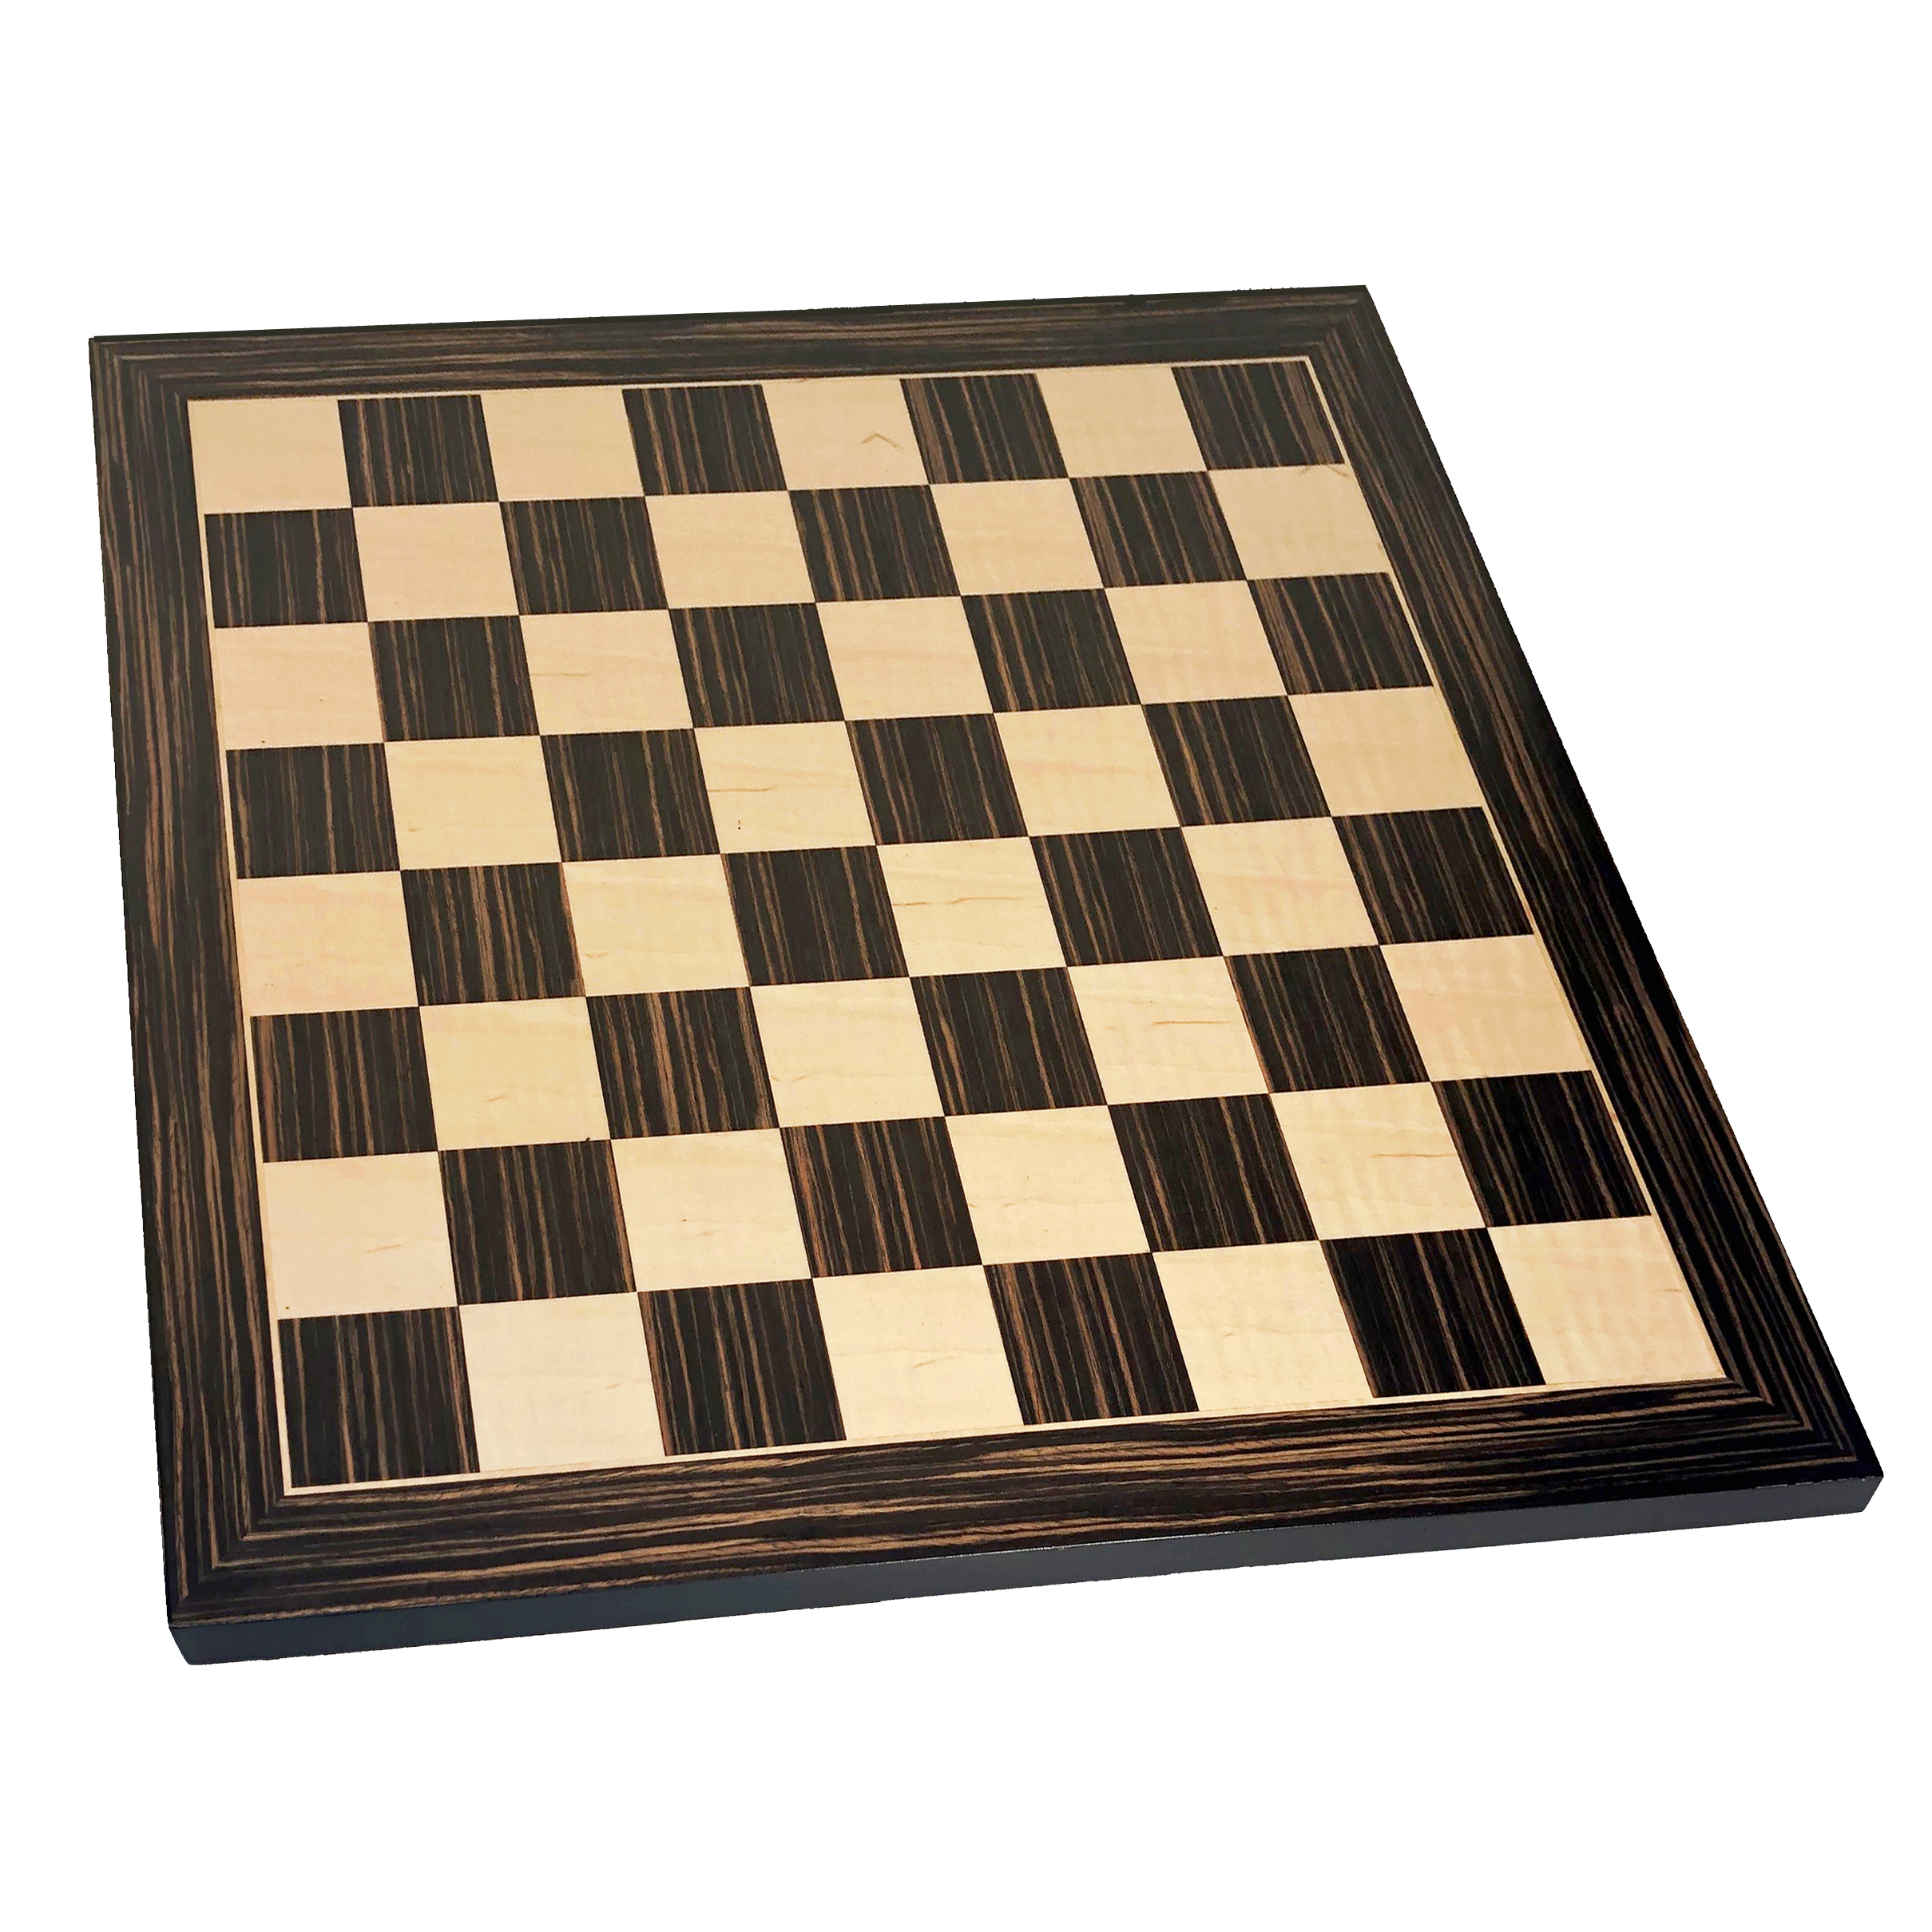 60+ Open Chess Board With Chess Wooden Pieces Stock Photos